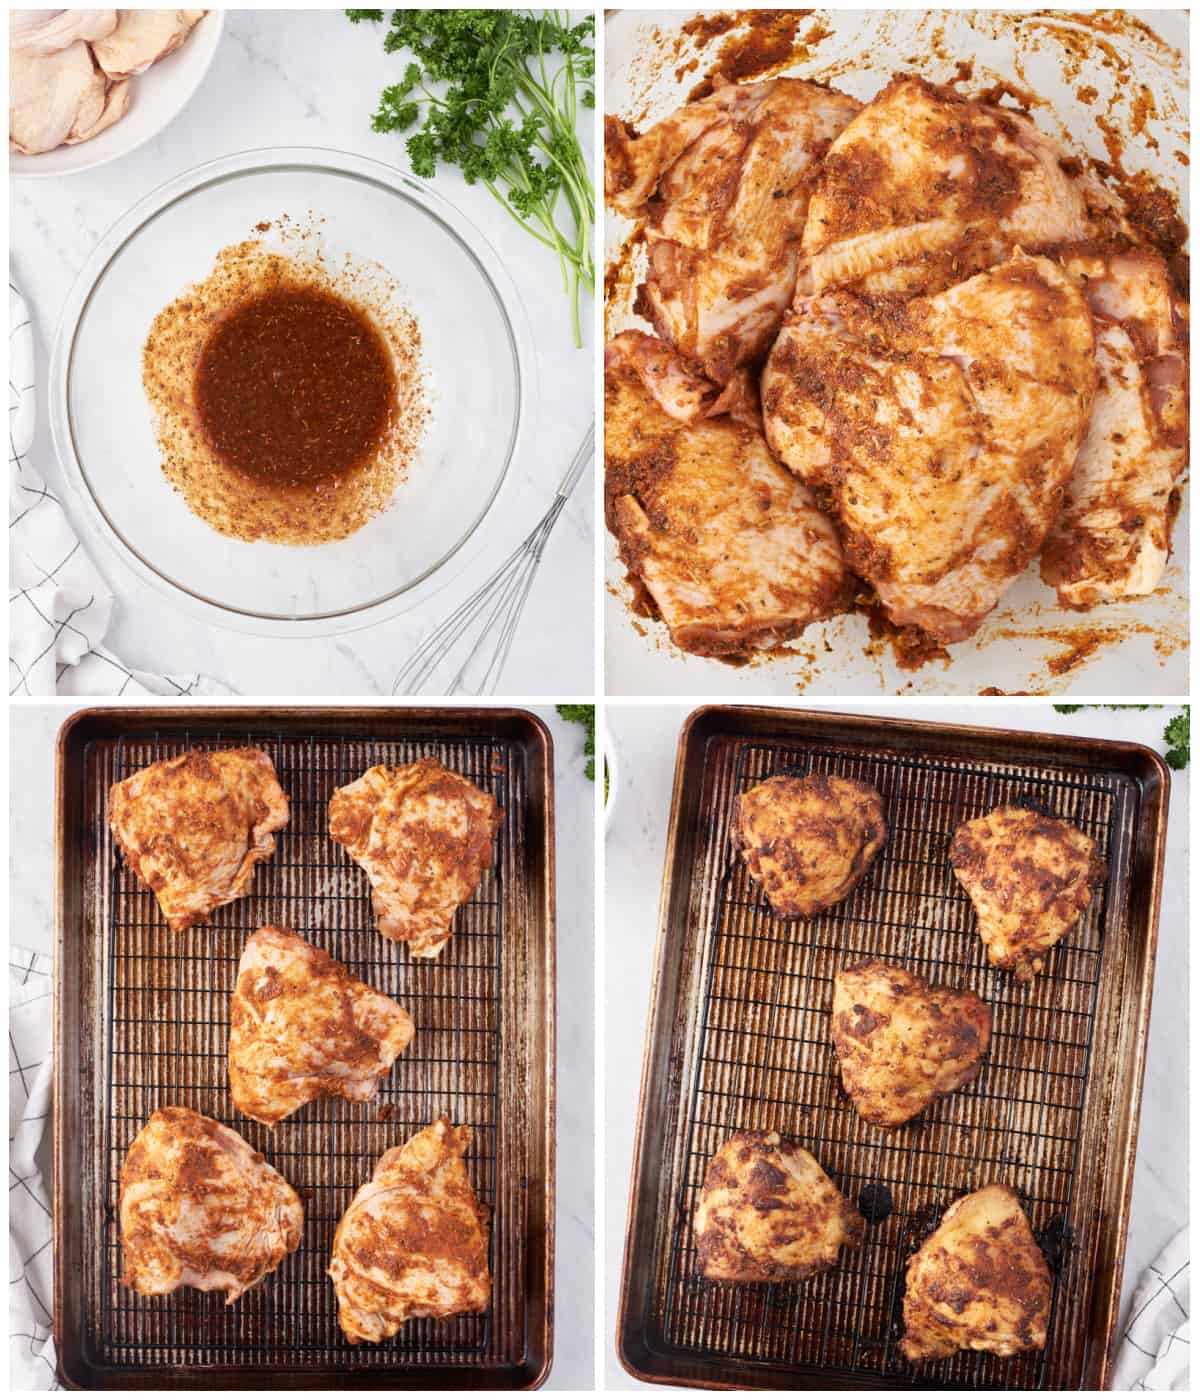 Step by step photos on how to make Roasted Chicken Thighs.